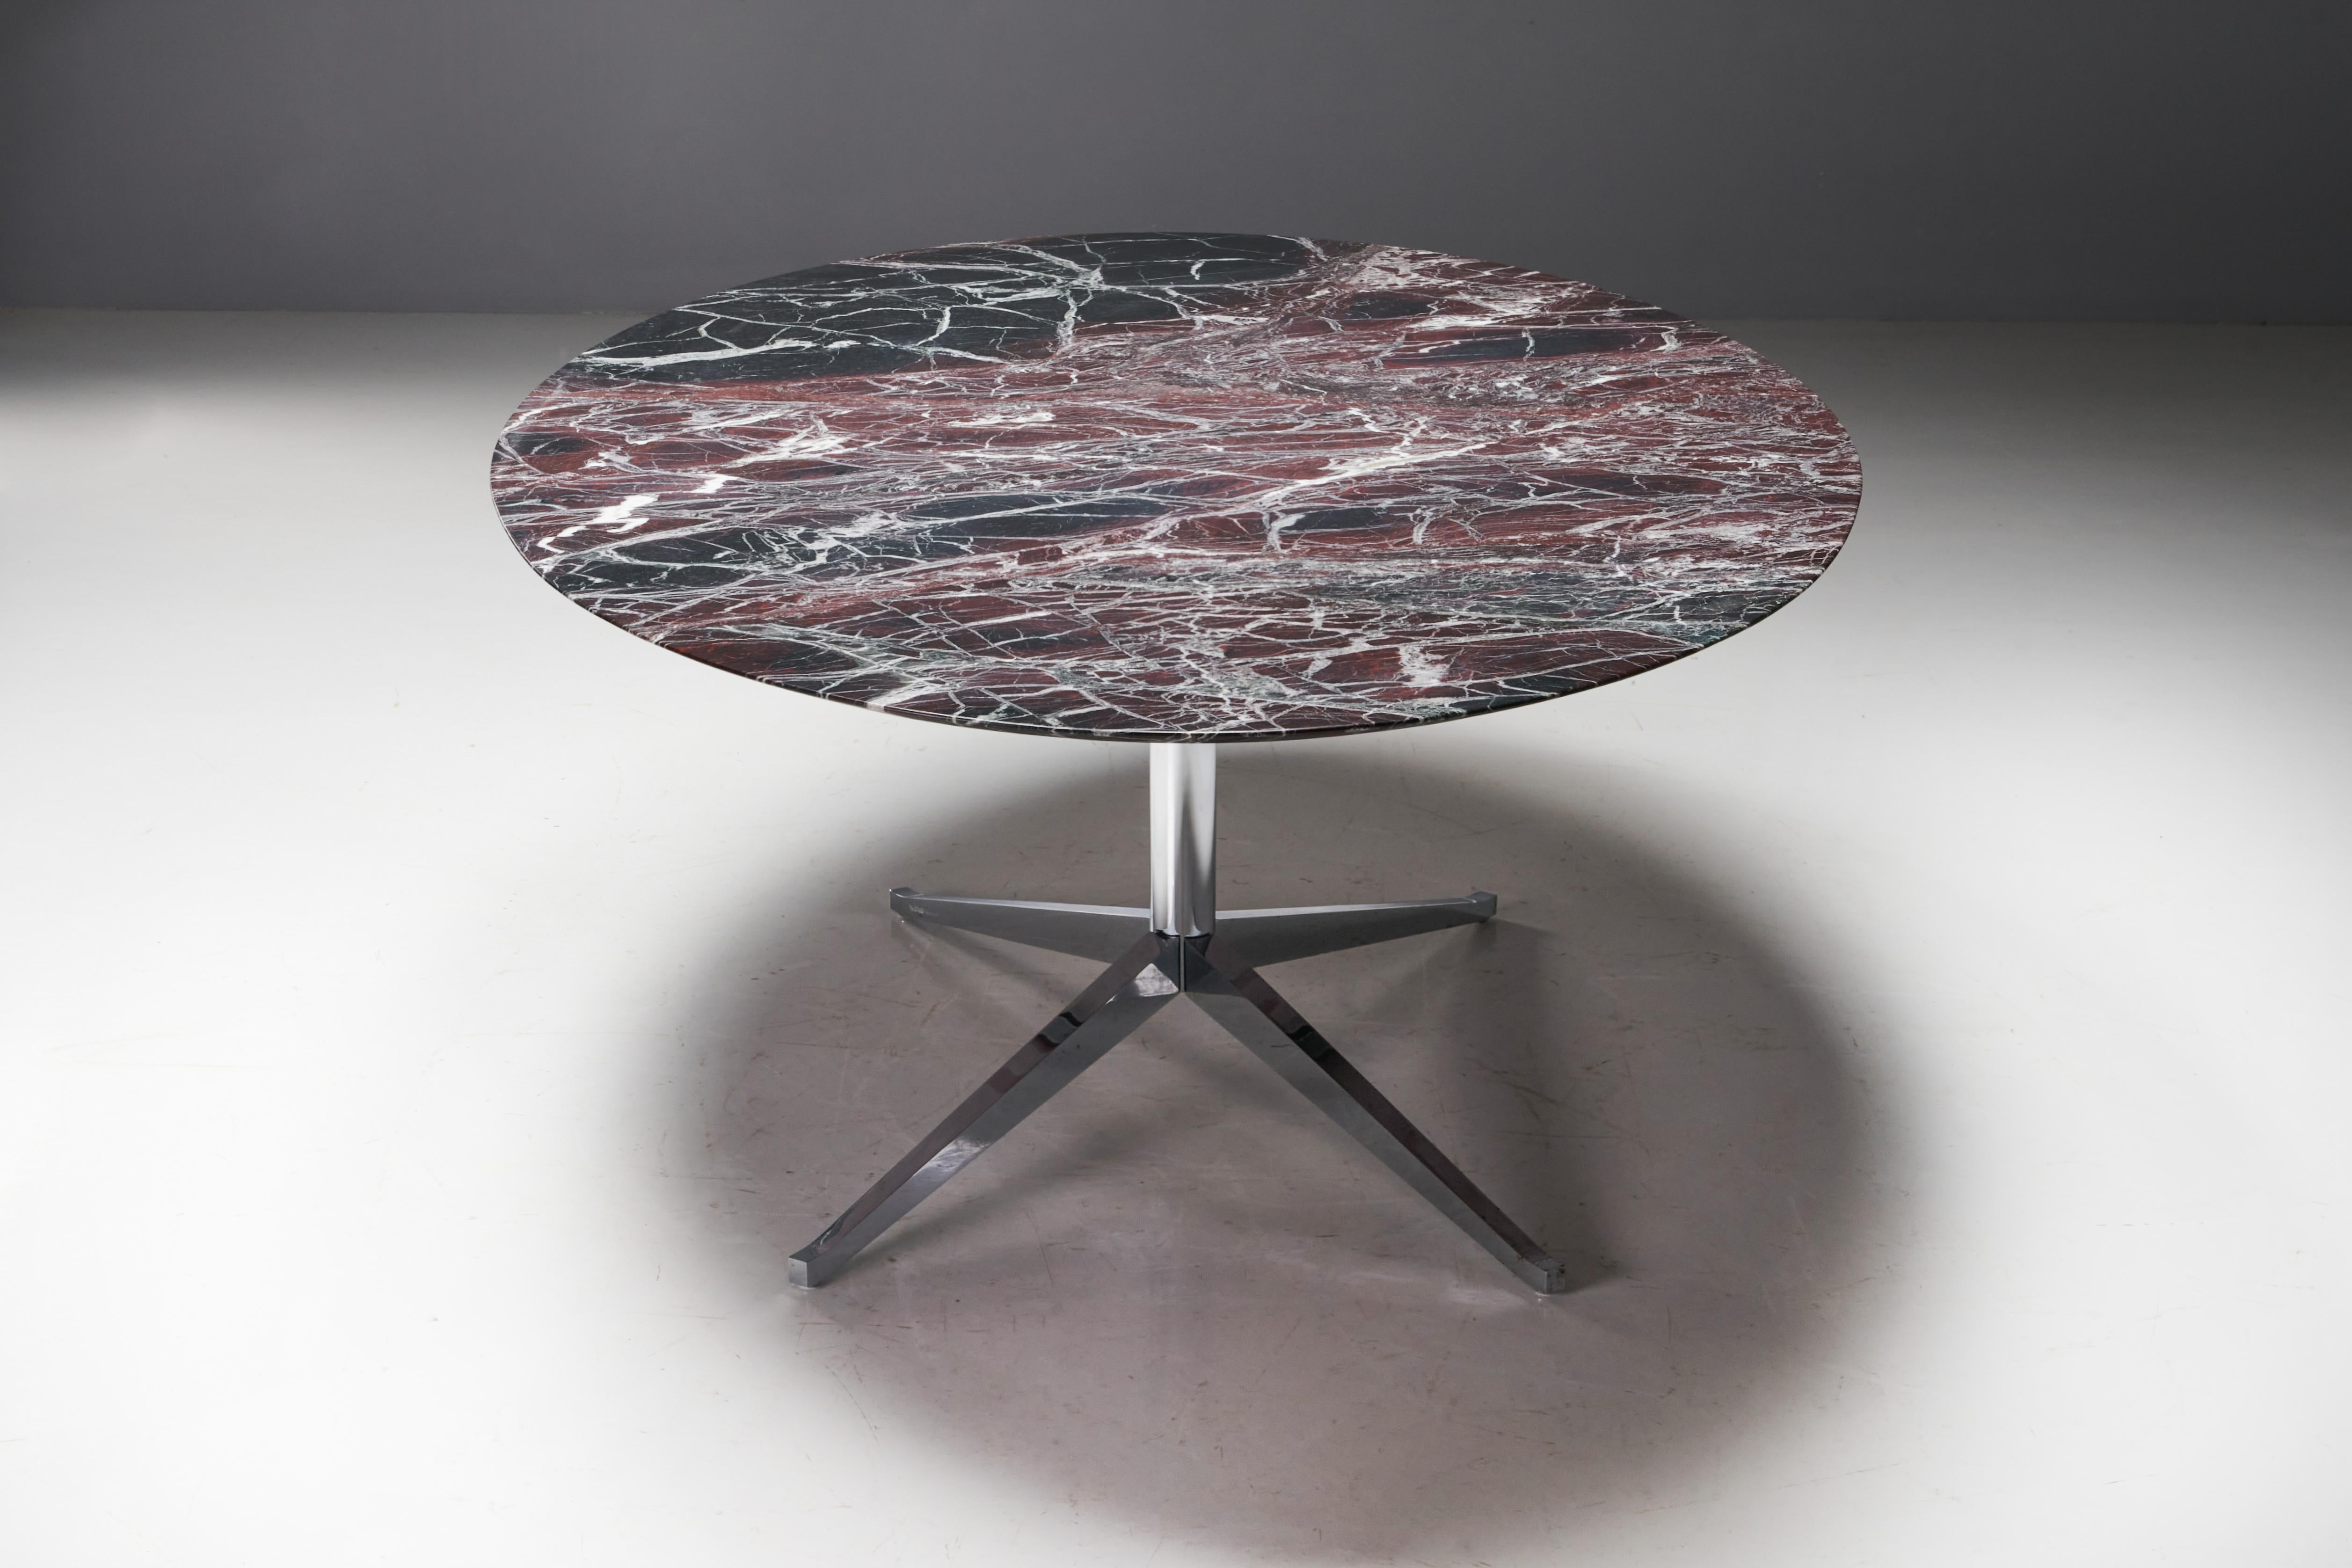 Steel Oval Burgundy Marble Dining Table by Florence Knoll, United States, 1960s For Sale